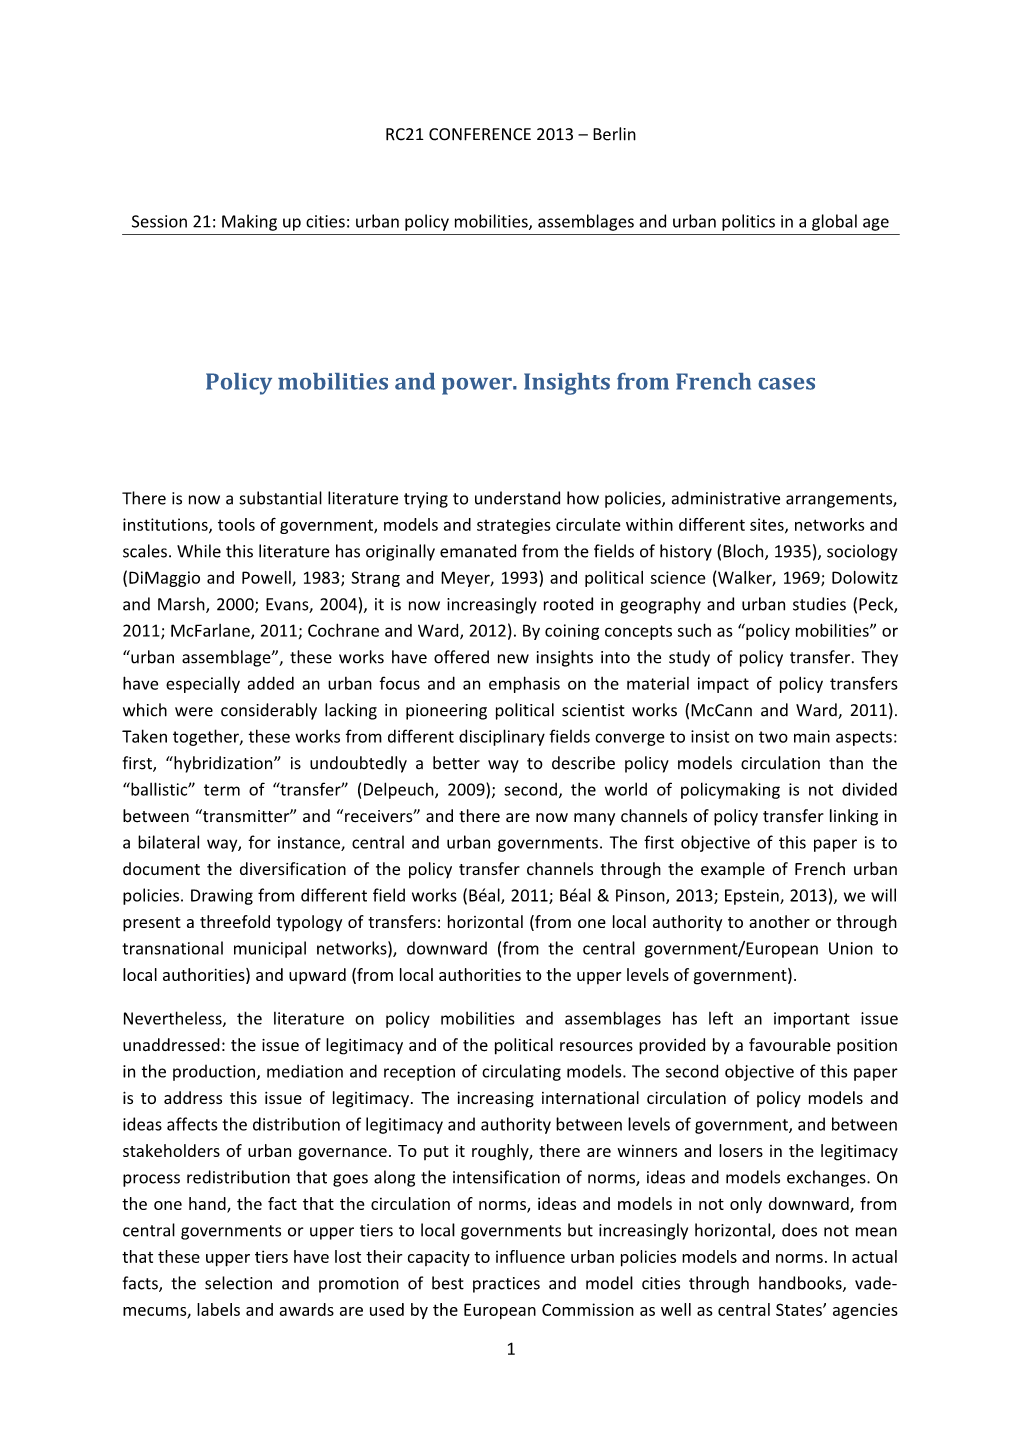 Policy Mobilities and Power. Insights from French Cases